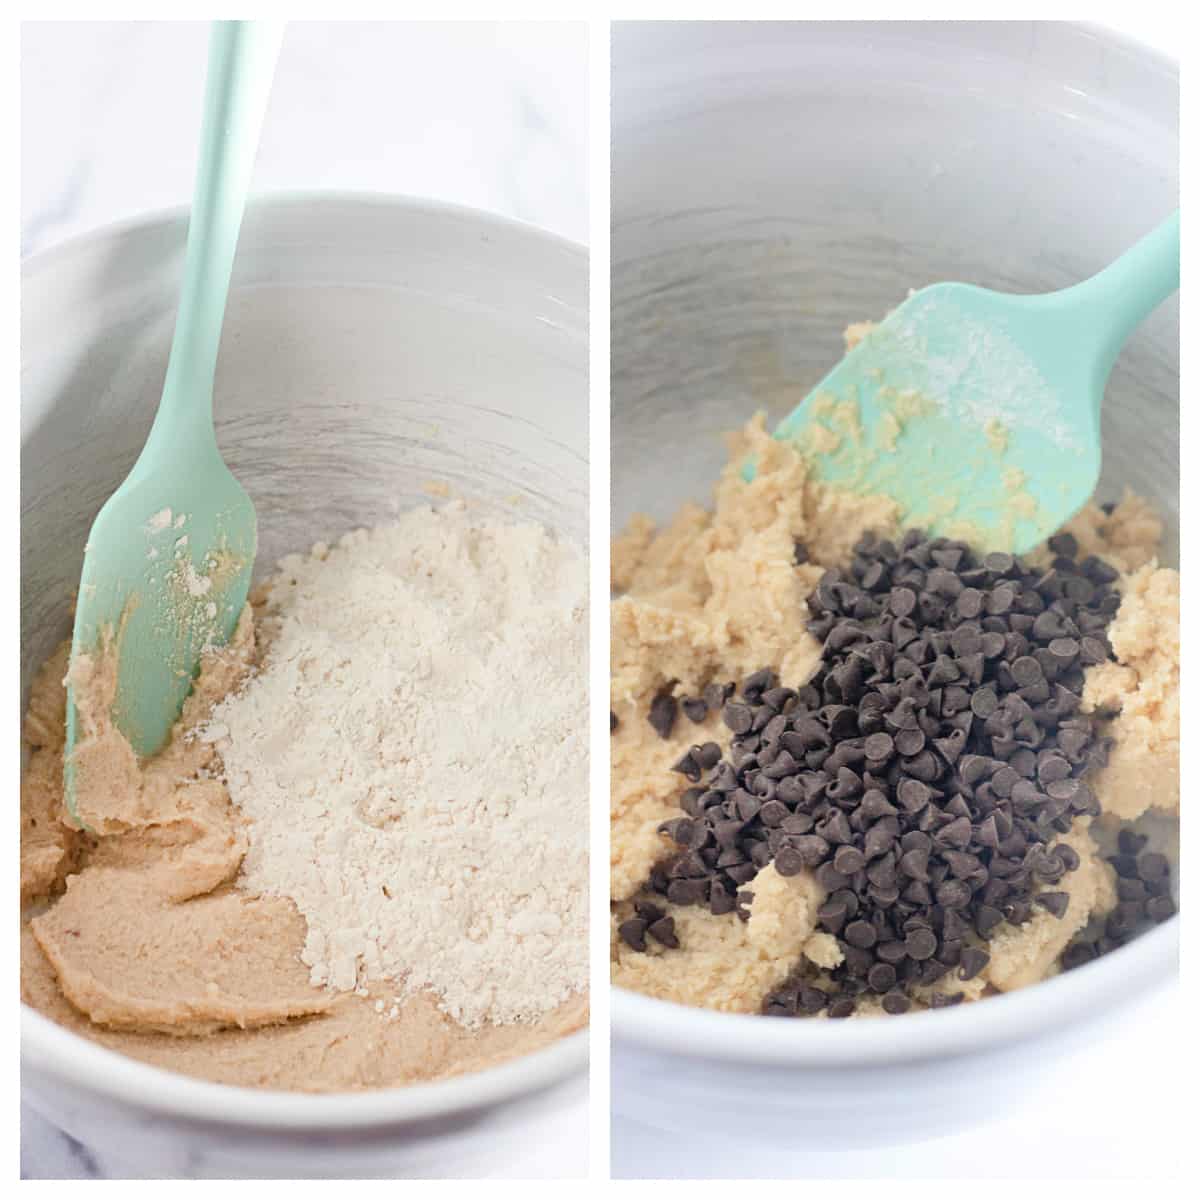 Mixing in the flour and chocolate chips.